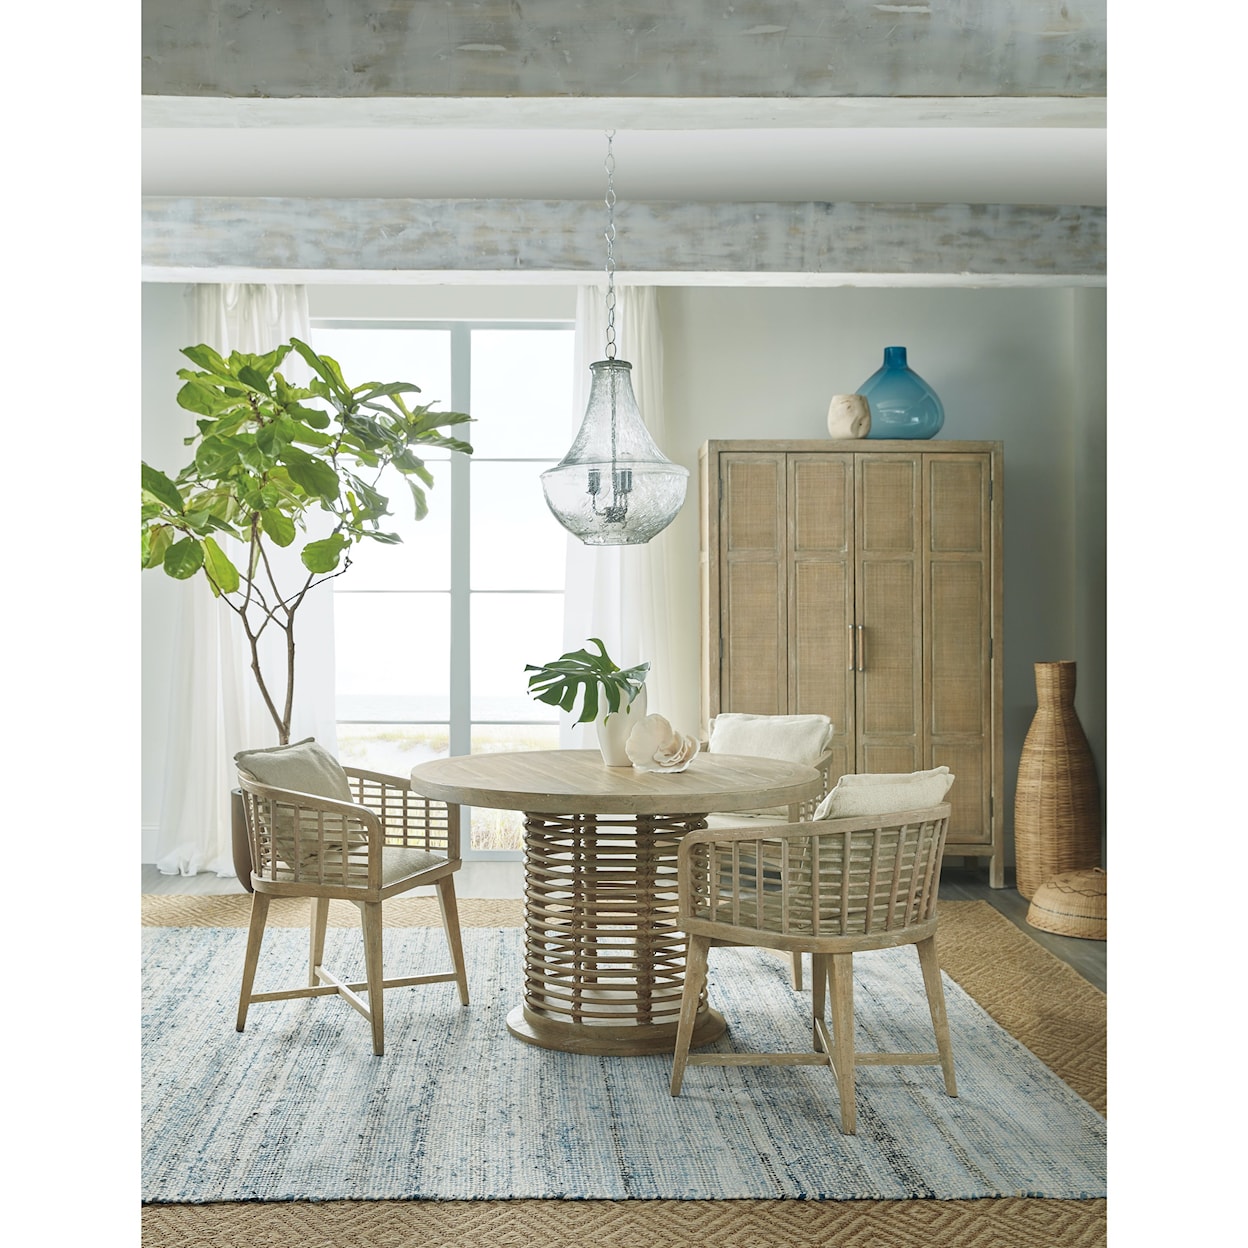 Hooker Furniture Surfrider 4-Piece Table and Chair Set